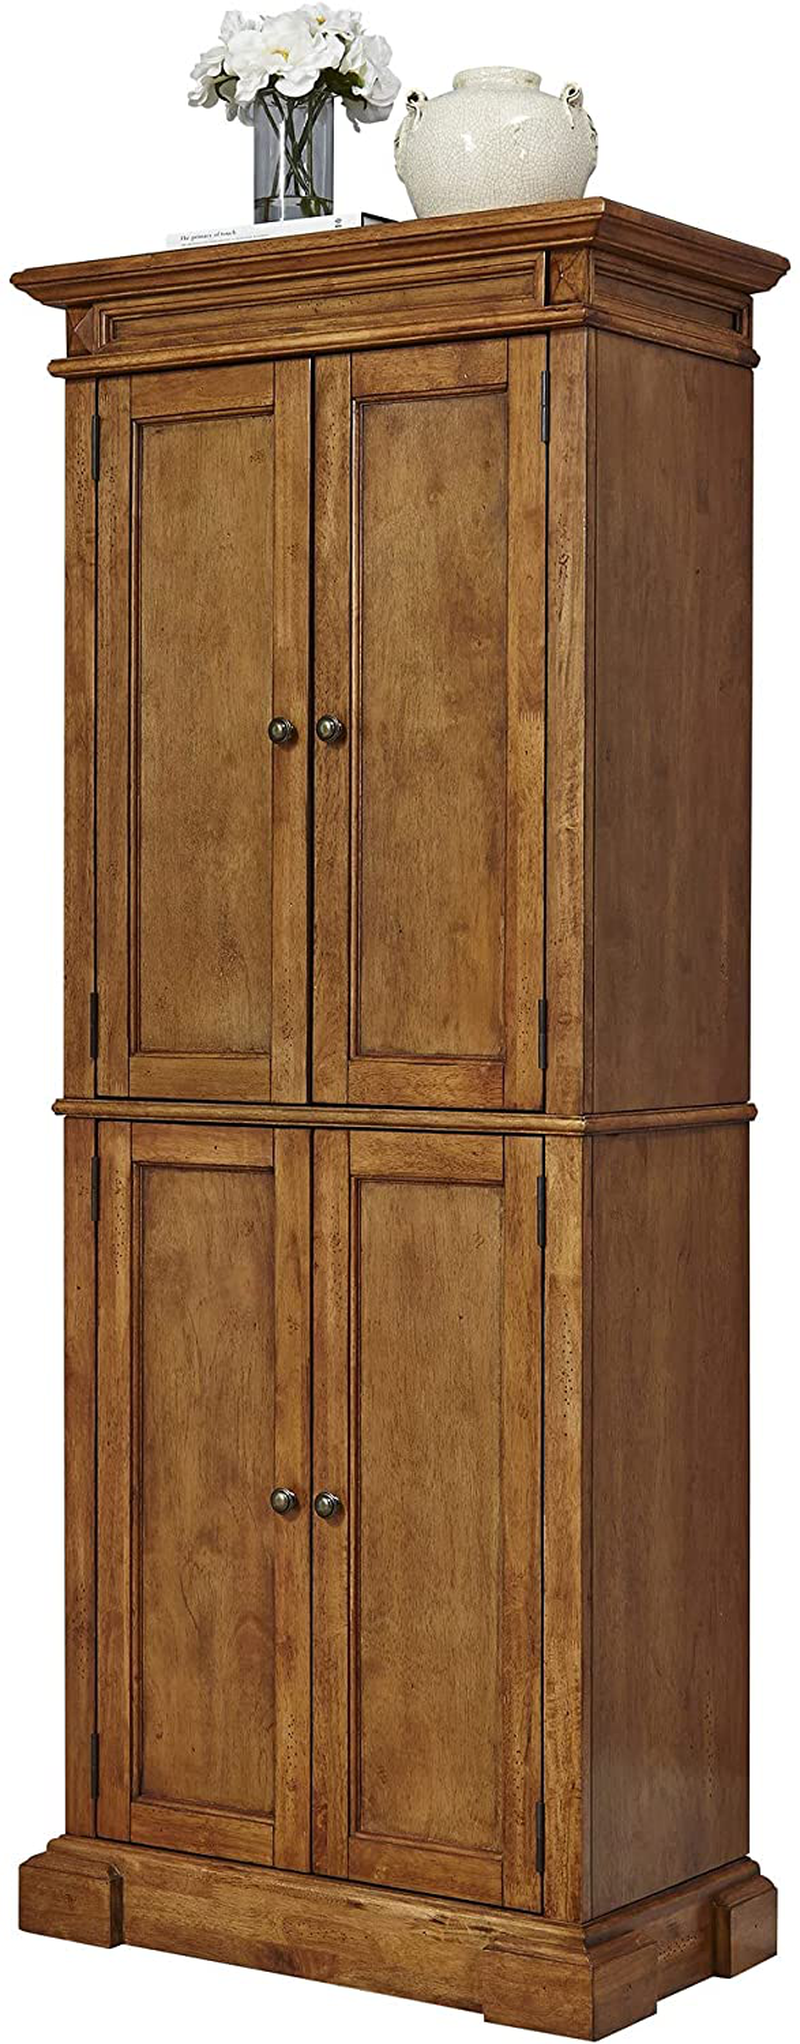 Home Styles Freestanding Americana Kitchen Pantry in Cherry Finish Constructed of Hardwood Solids with Four Storage Doors, Four Adjustable Shelves Home & Garden > Kitchen & Dining > Food Storage Home Styles Oak  